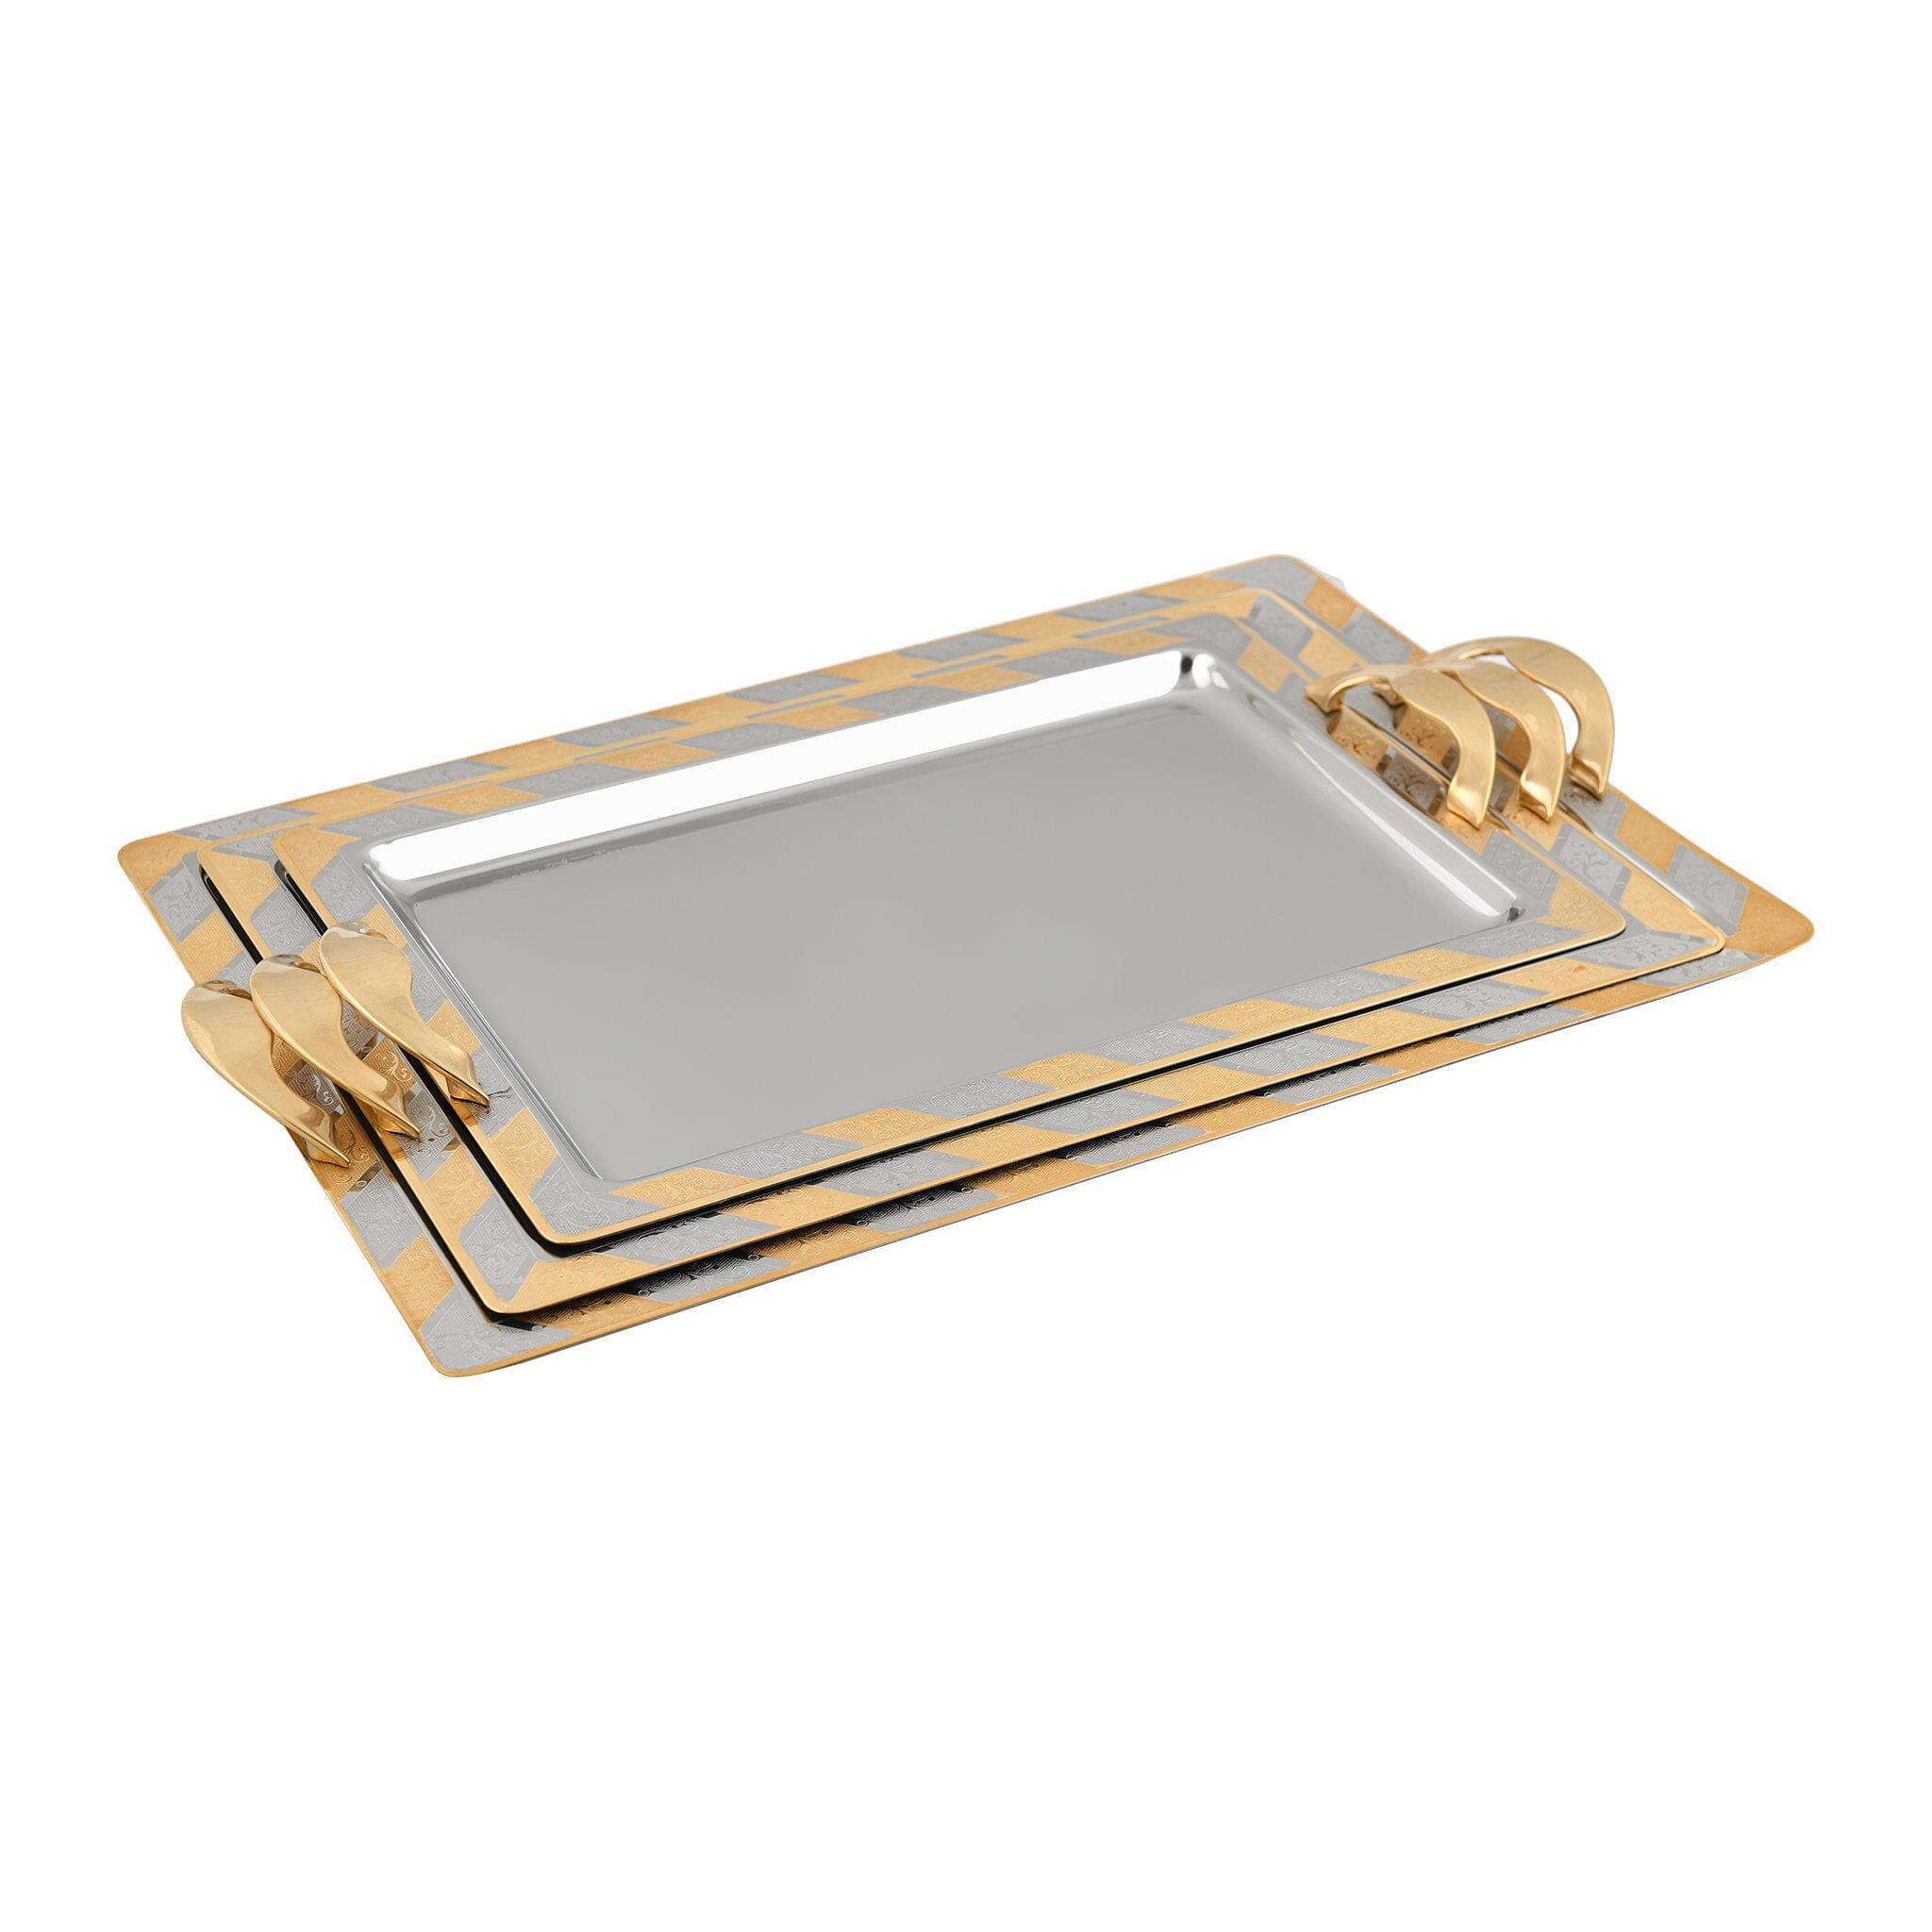 Elegant Gioiel - Rectangular Tray Set with Handles 3 Pieces - Gold - Stainless Steel 18/10 - 75000144